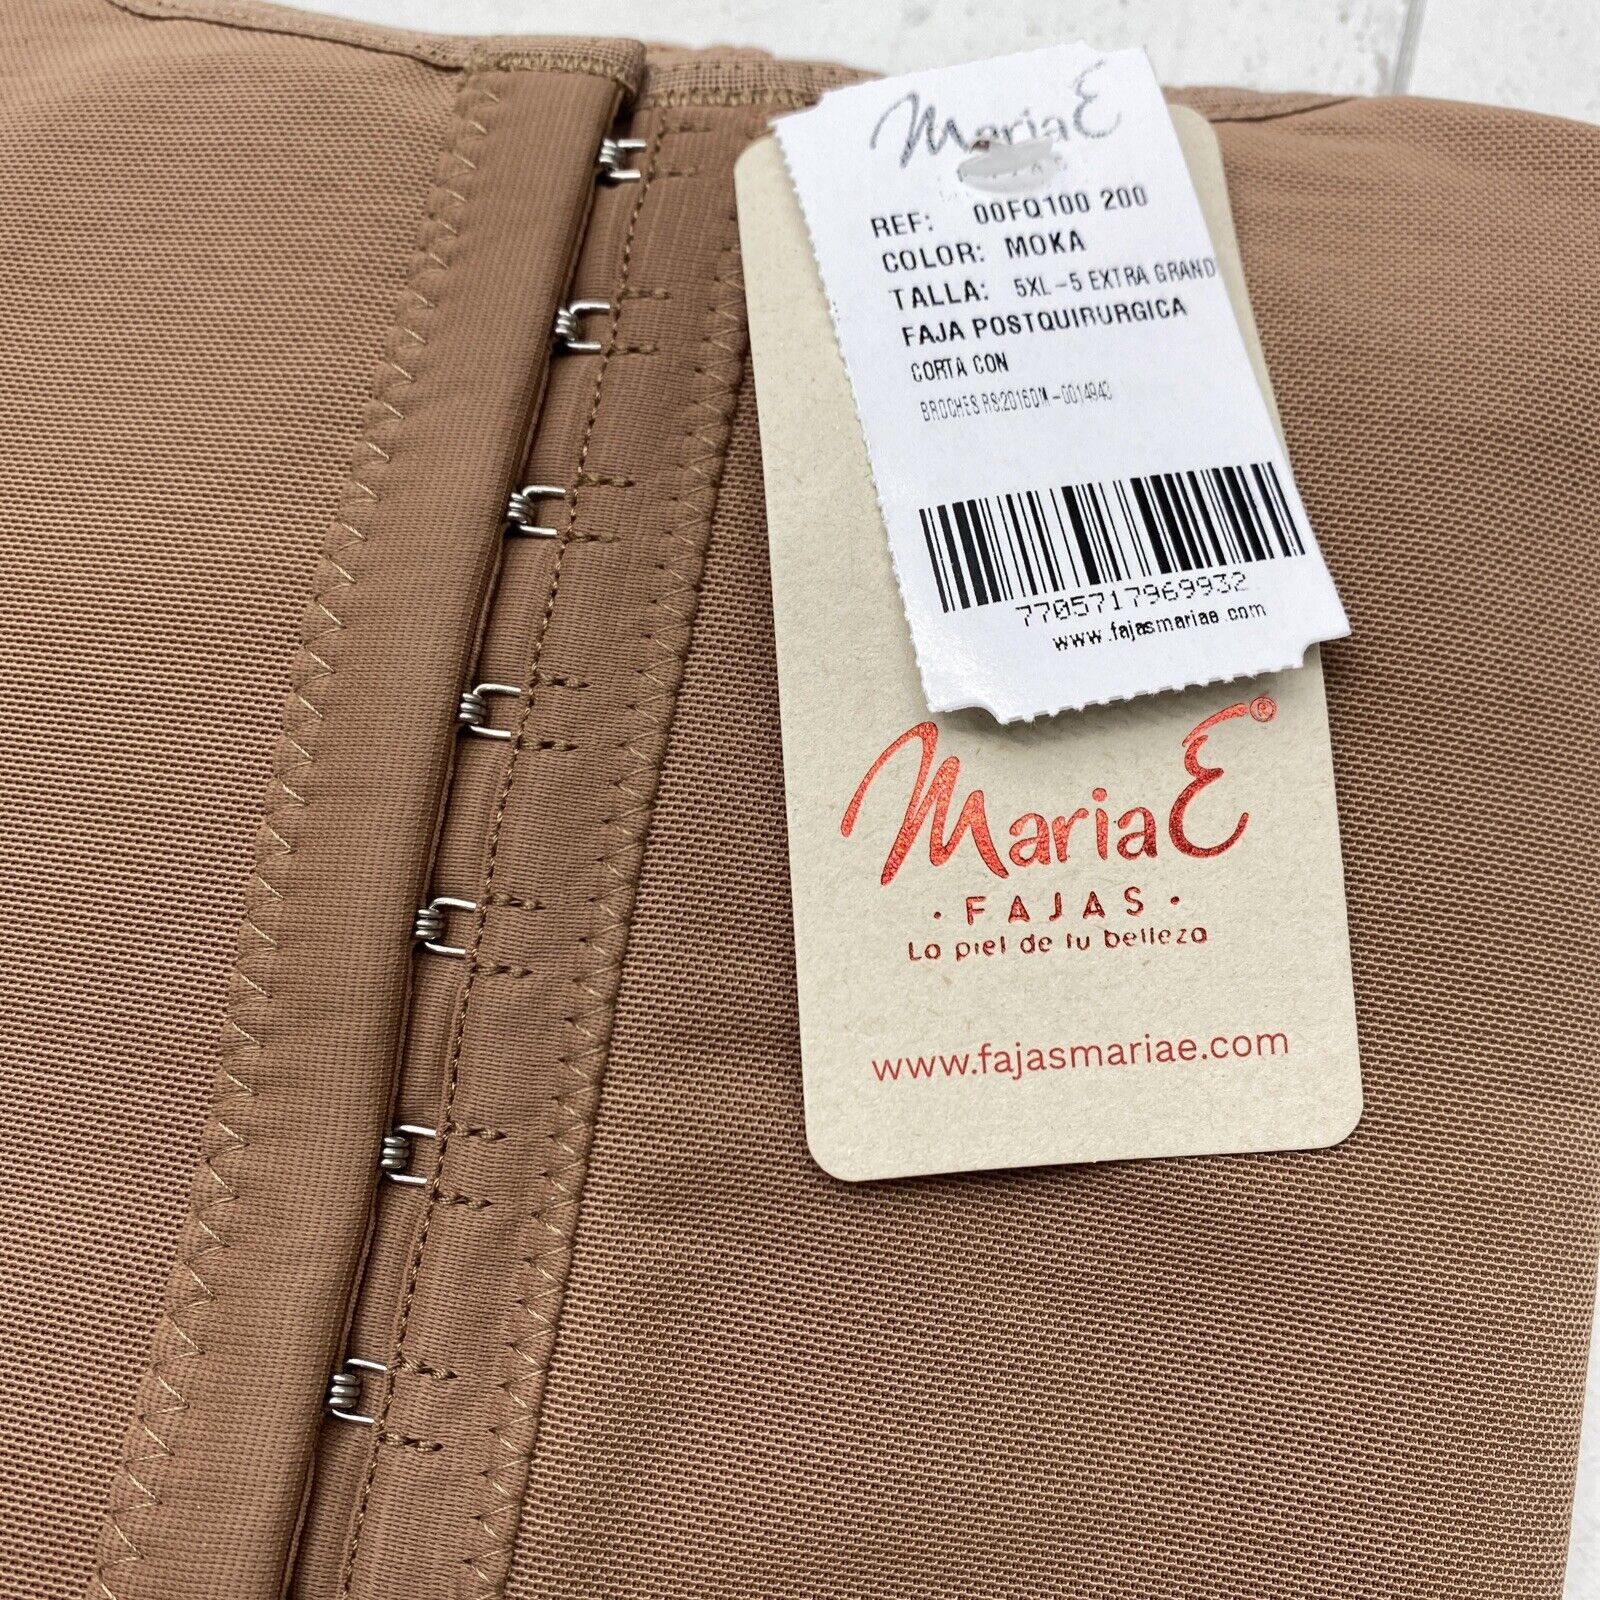 Find Cheap, Fashionable and Slimming mariae fajas 